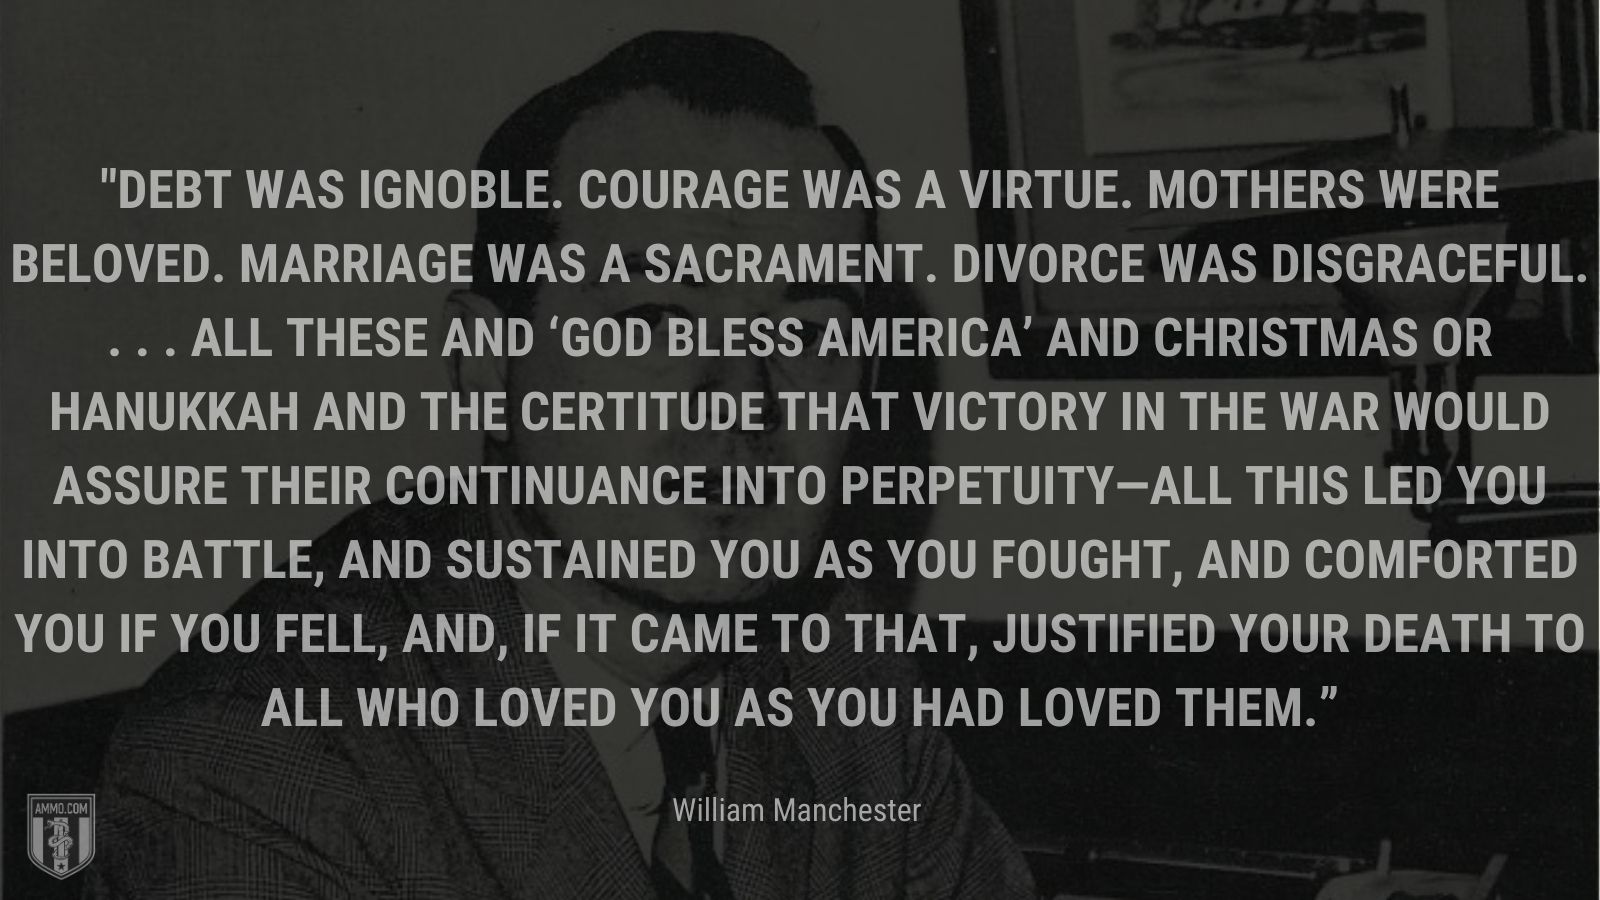 “Debt was ignoble. Courage was a virtue. Mothers were beloved. Marriage was a sacrament. Divorce was disgraceful. . . . All these and ‘God Bless America’ and Christmas or Hanukkah and the certitude that victory in the war would assure their continuance into perpetuity—all this led you into battle, and sustained you as you fought, and comforted you if you fell, and, if it came to that, justified your death to all who loved you as you had loved them.” - William Manchester